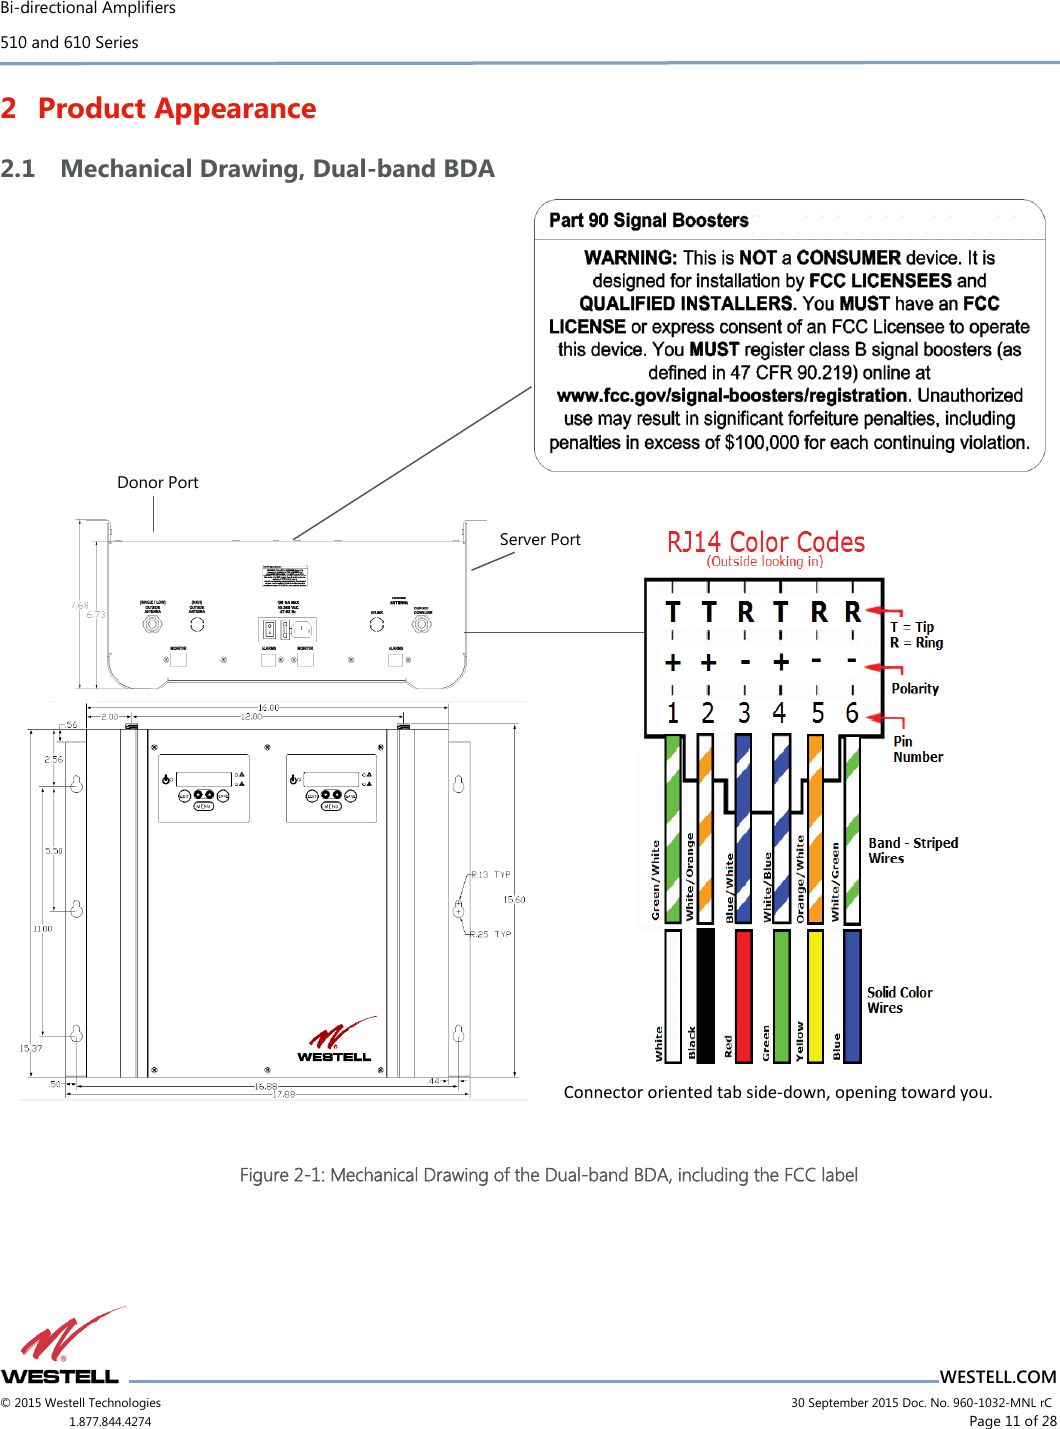 Bi-directional Amplifiers 510 and 610 Series                          WESTELL.COM © 2015 Westell Technologies                             30 September 2015 Doc. No. 960-1032-MNL rC 1.877.844.4274                      Page 11 of 28  2 Product Appearance 2.1 Mechanical Drawing, Dual-band BDA                        Figure 2-1: Mechanical Drawing of the Dual-band BDA, including the FCC label Server Port Donor Port Connector oriented tab side-down, opening toward you. 